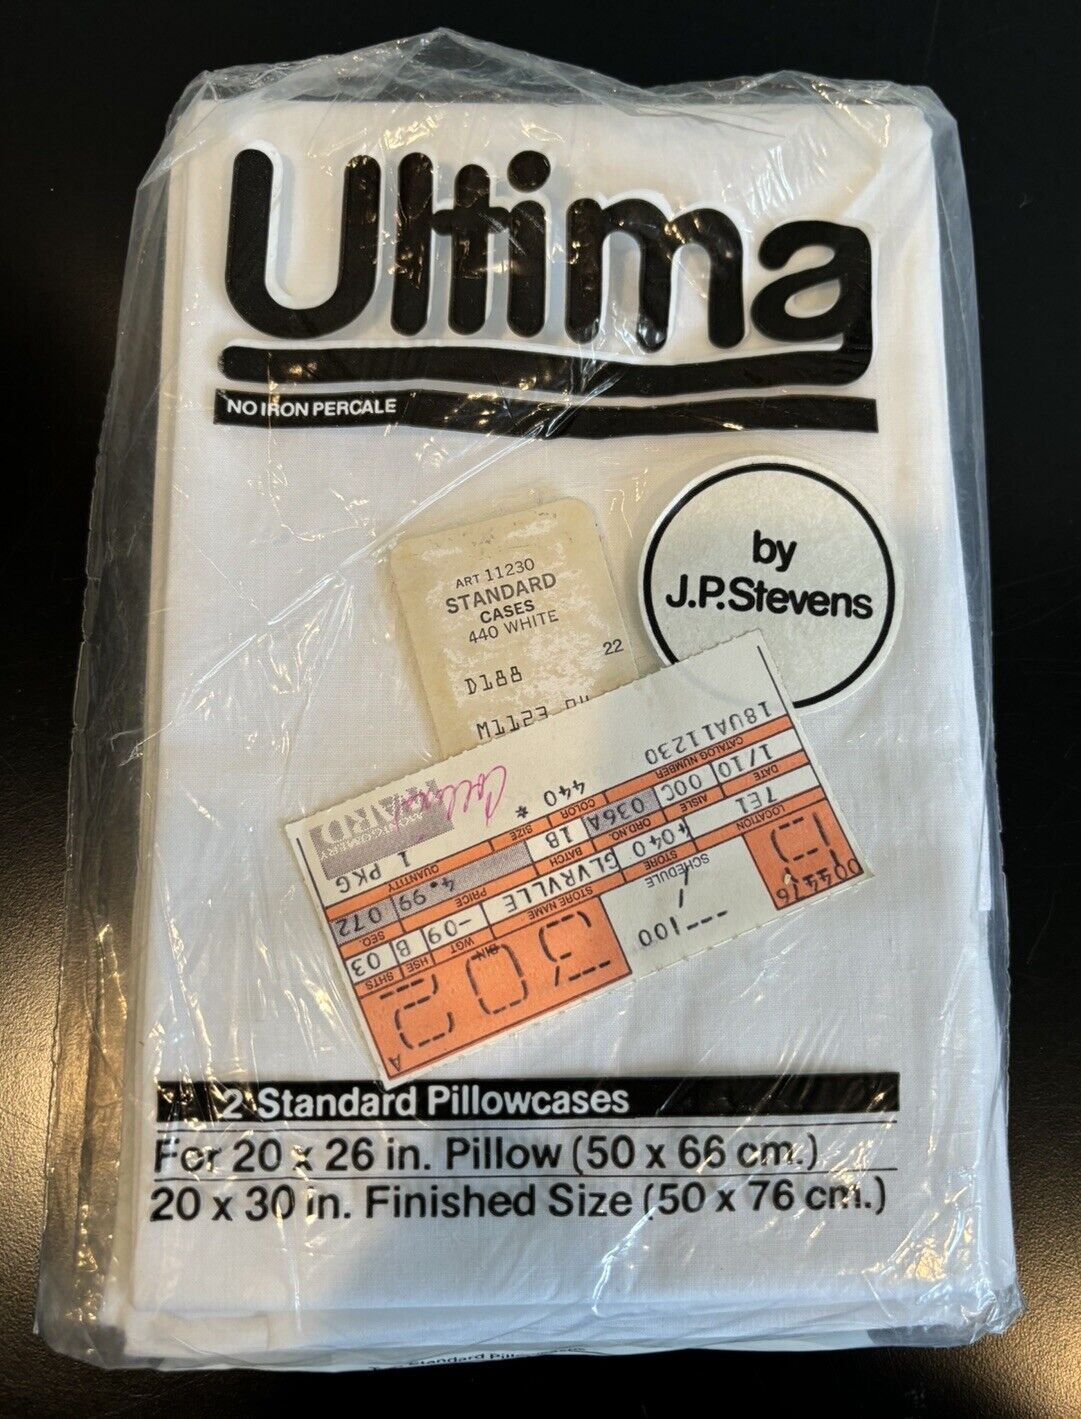 VTG Ultima White Two Standard Pillow Cases Fits 20 X 26 No Iron Percale NOS NEW